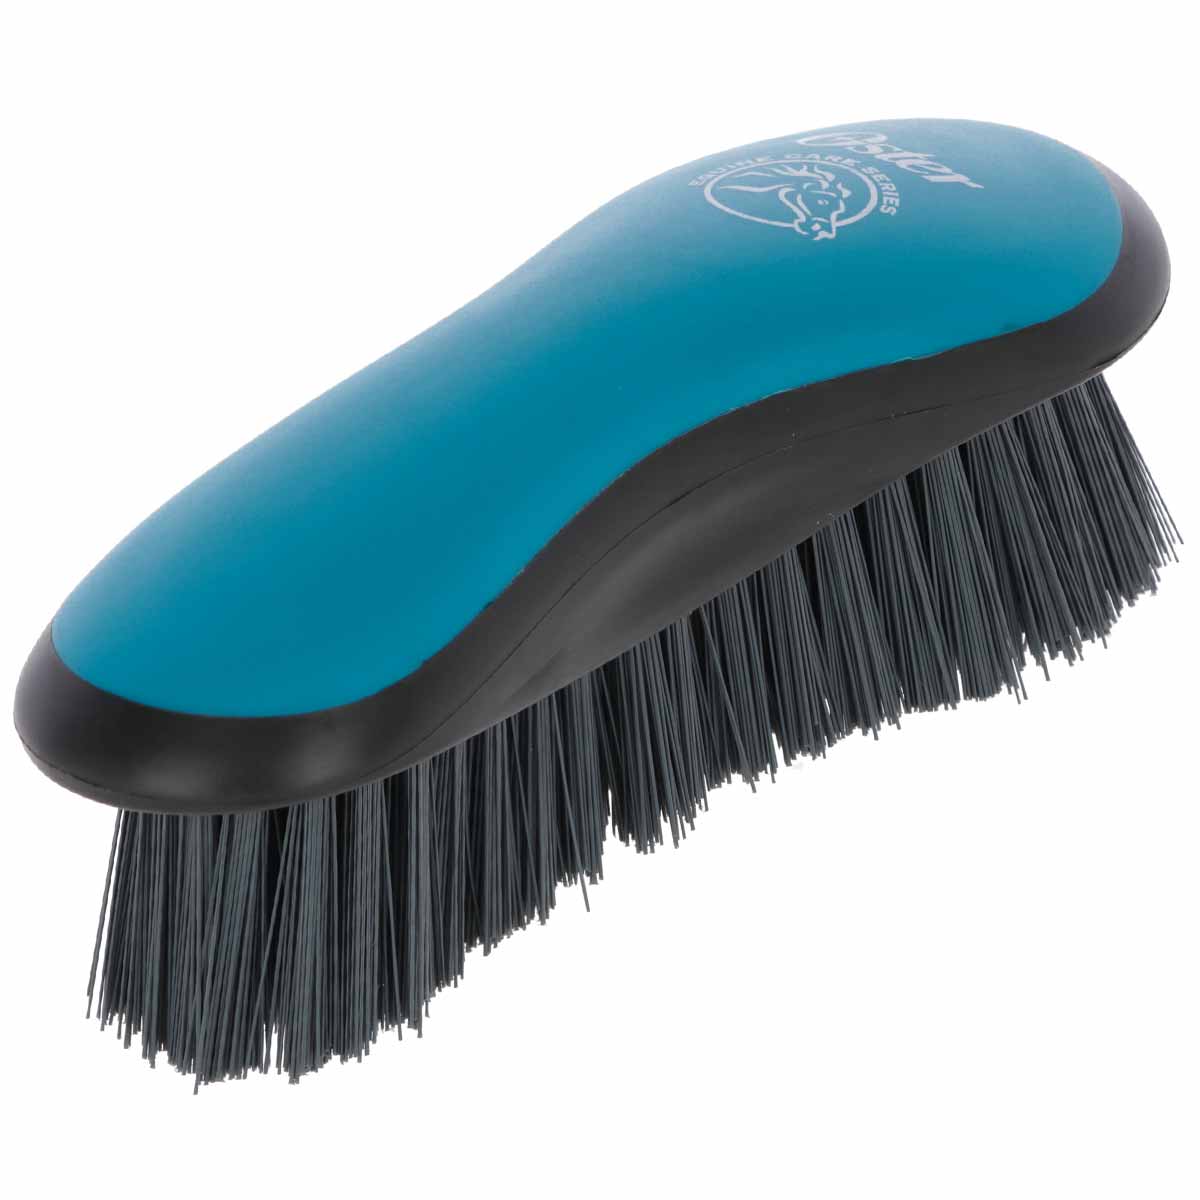 Oster Equine Care Series Stiff Grooming Brush turqouise